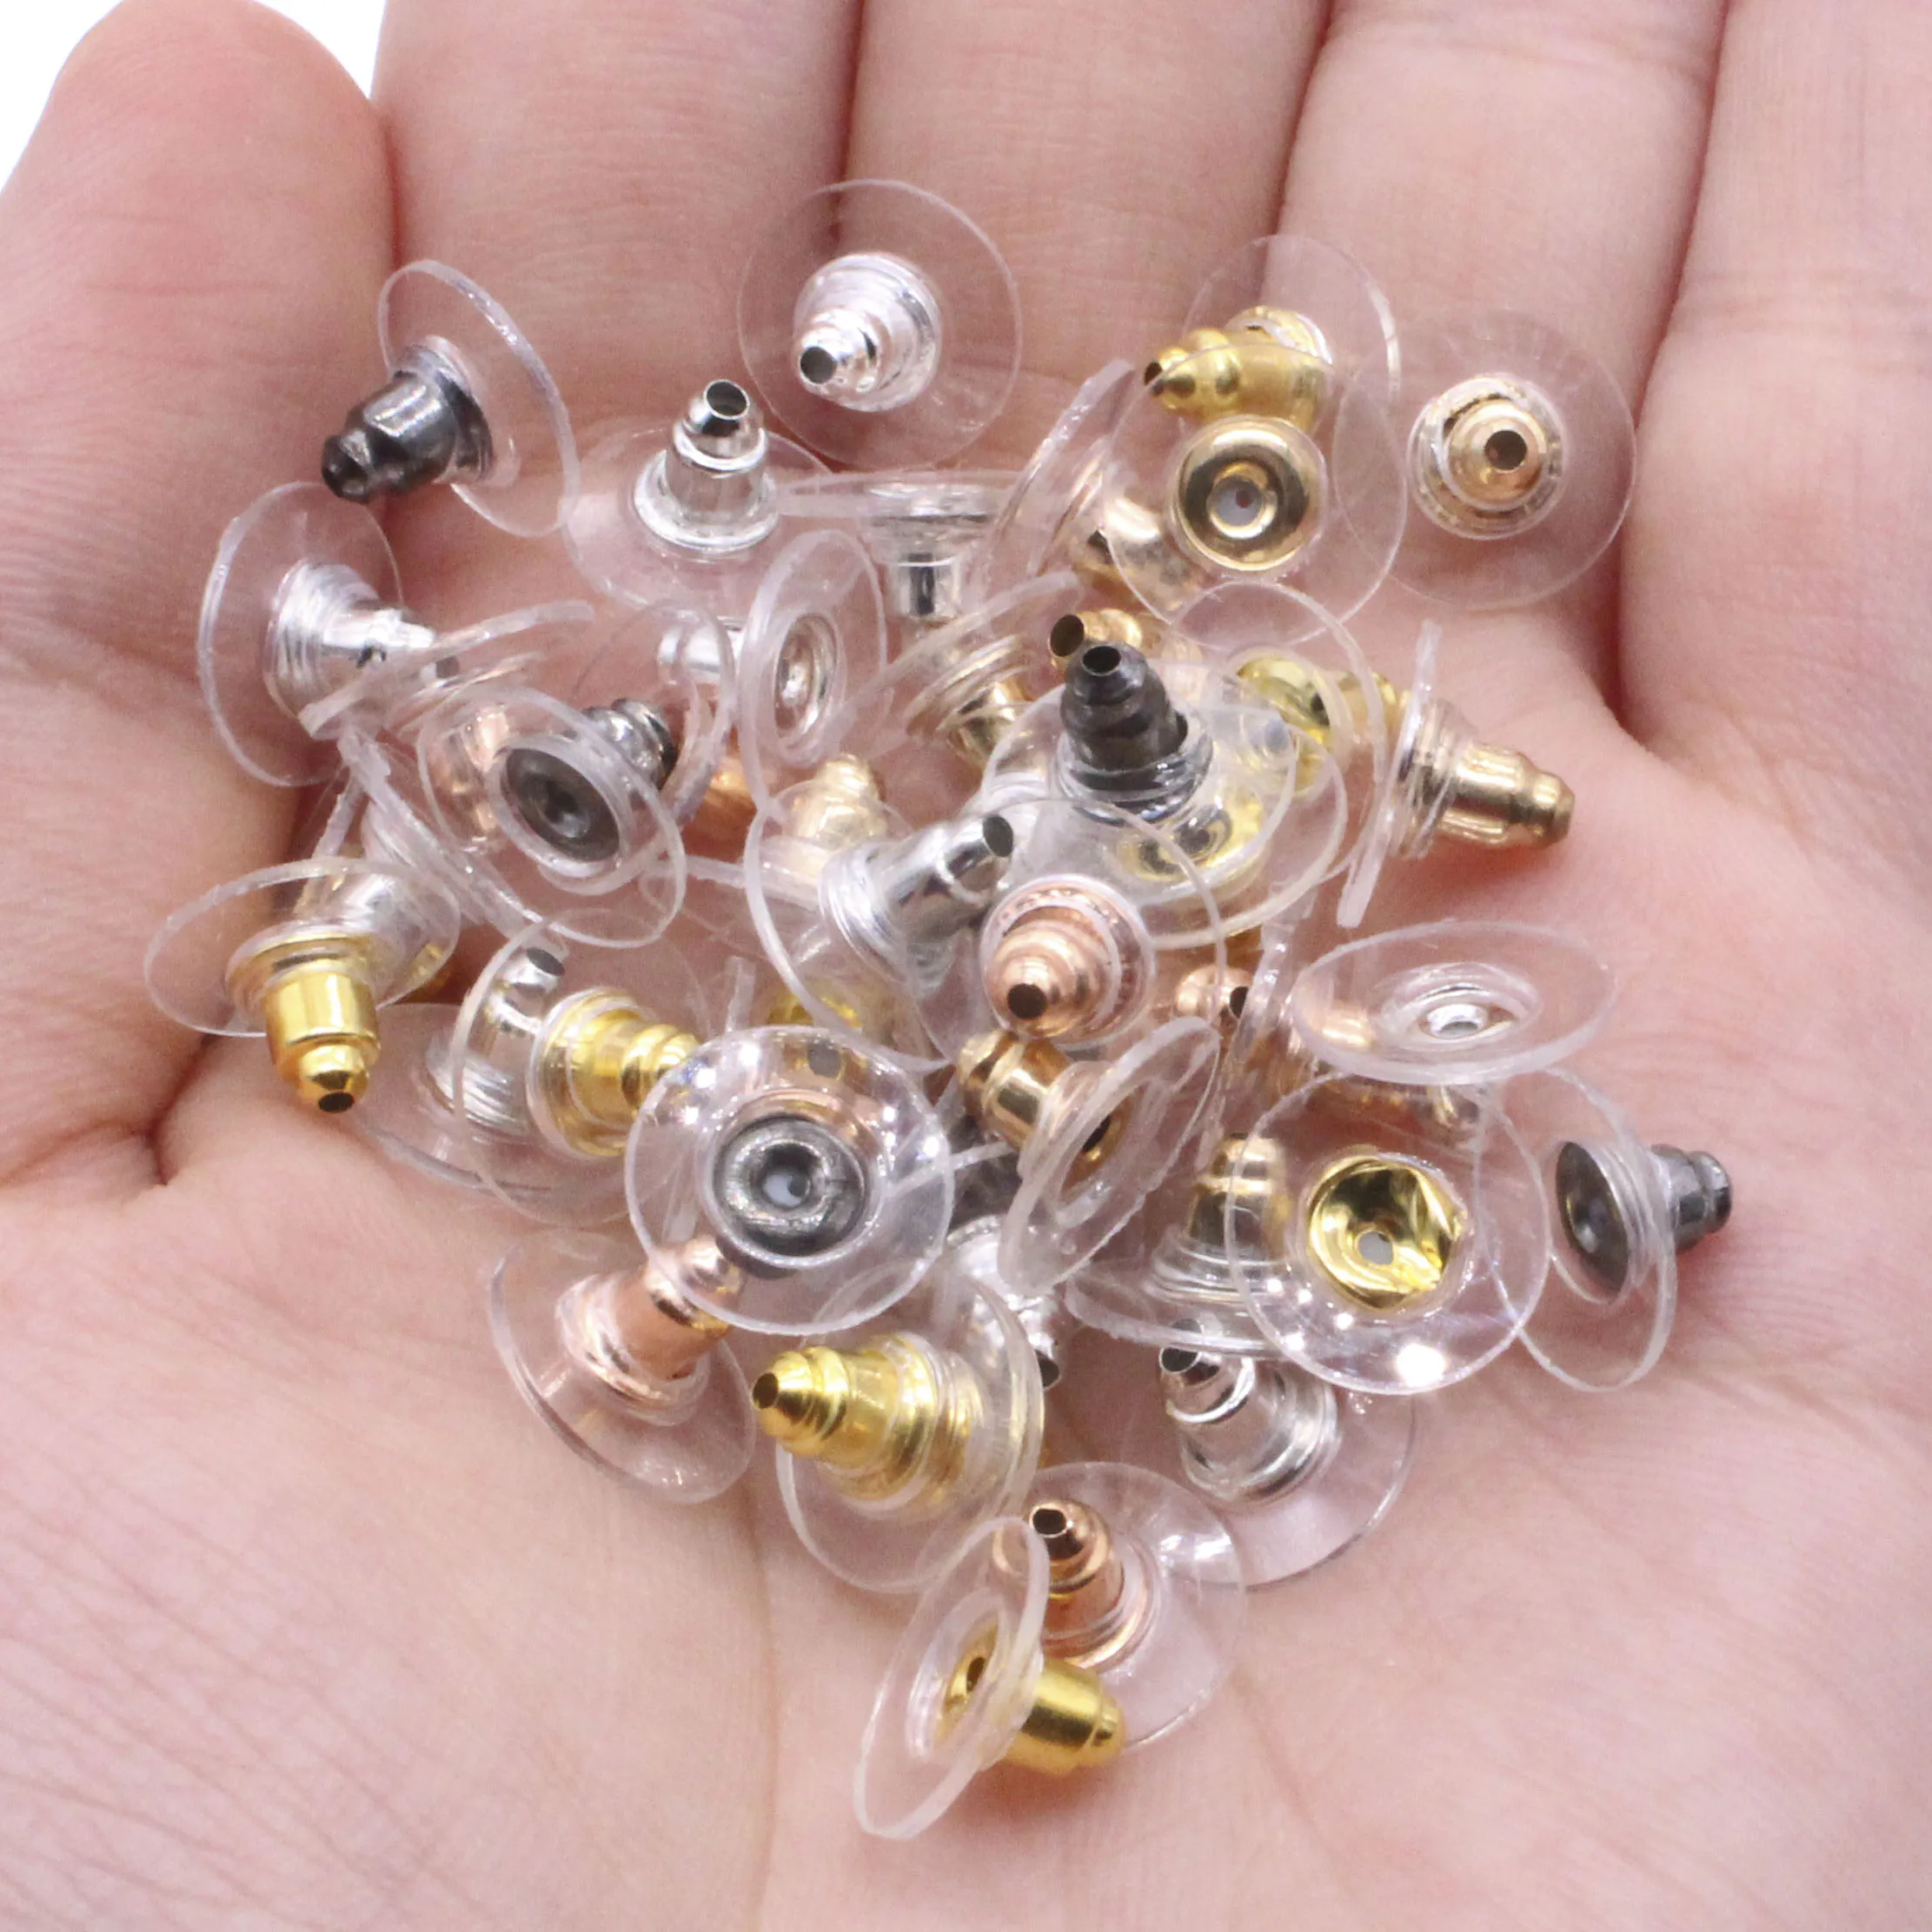 BEADNOVA Silicone Earring Backs Replacements Clear Plastic Rubber Earring  Safety Backings for Posts Secure Pierced Earring Back for Fish Hook Studs  Hypoallergenic Back of Earrings Stopper 1000pcs - Beadnova